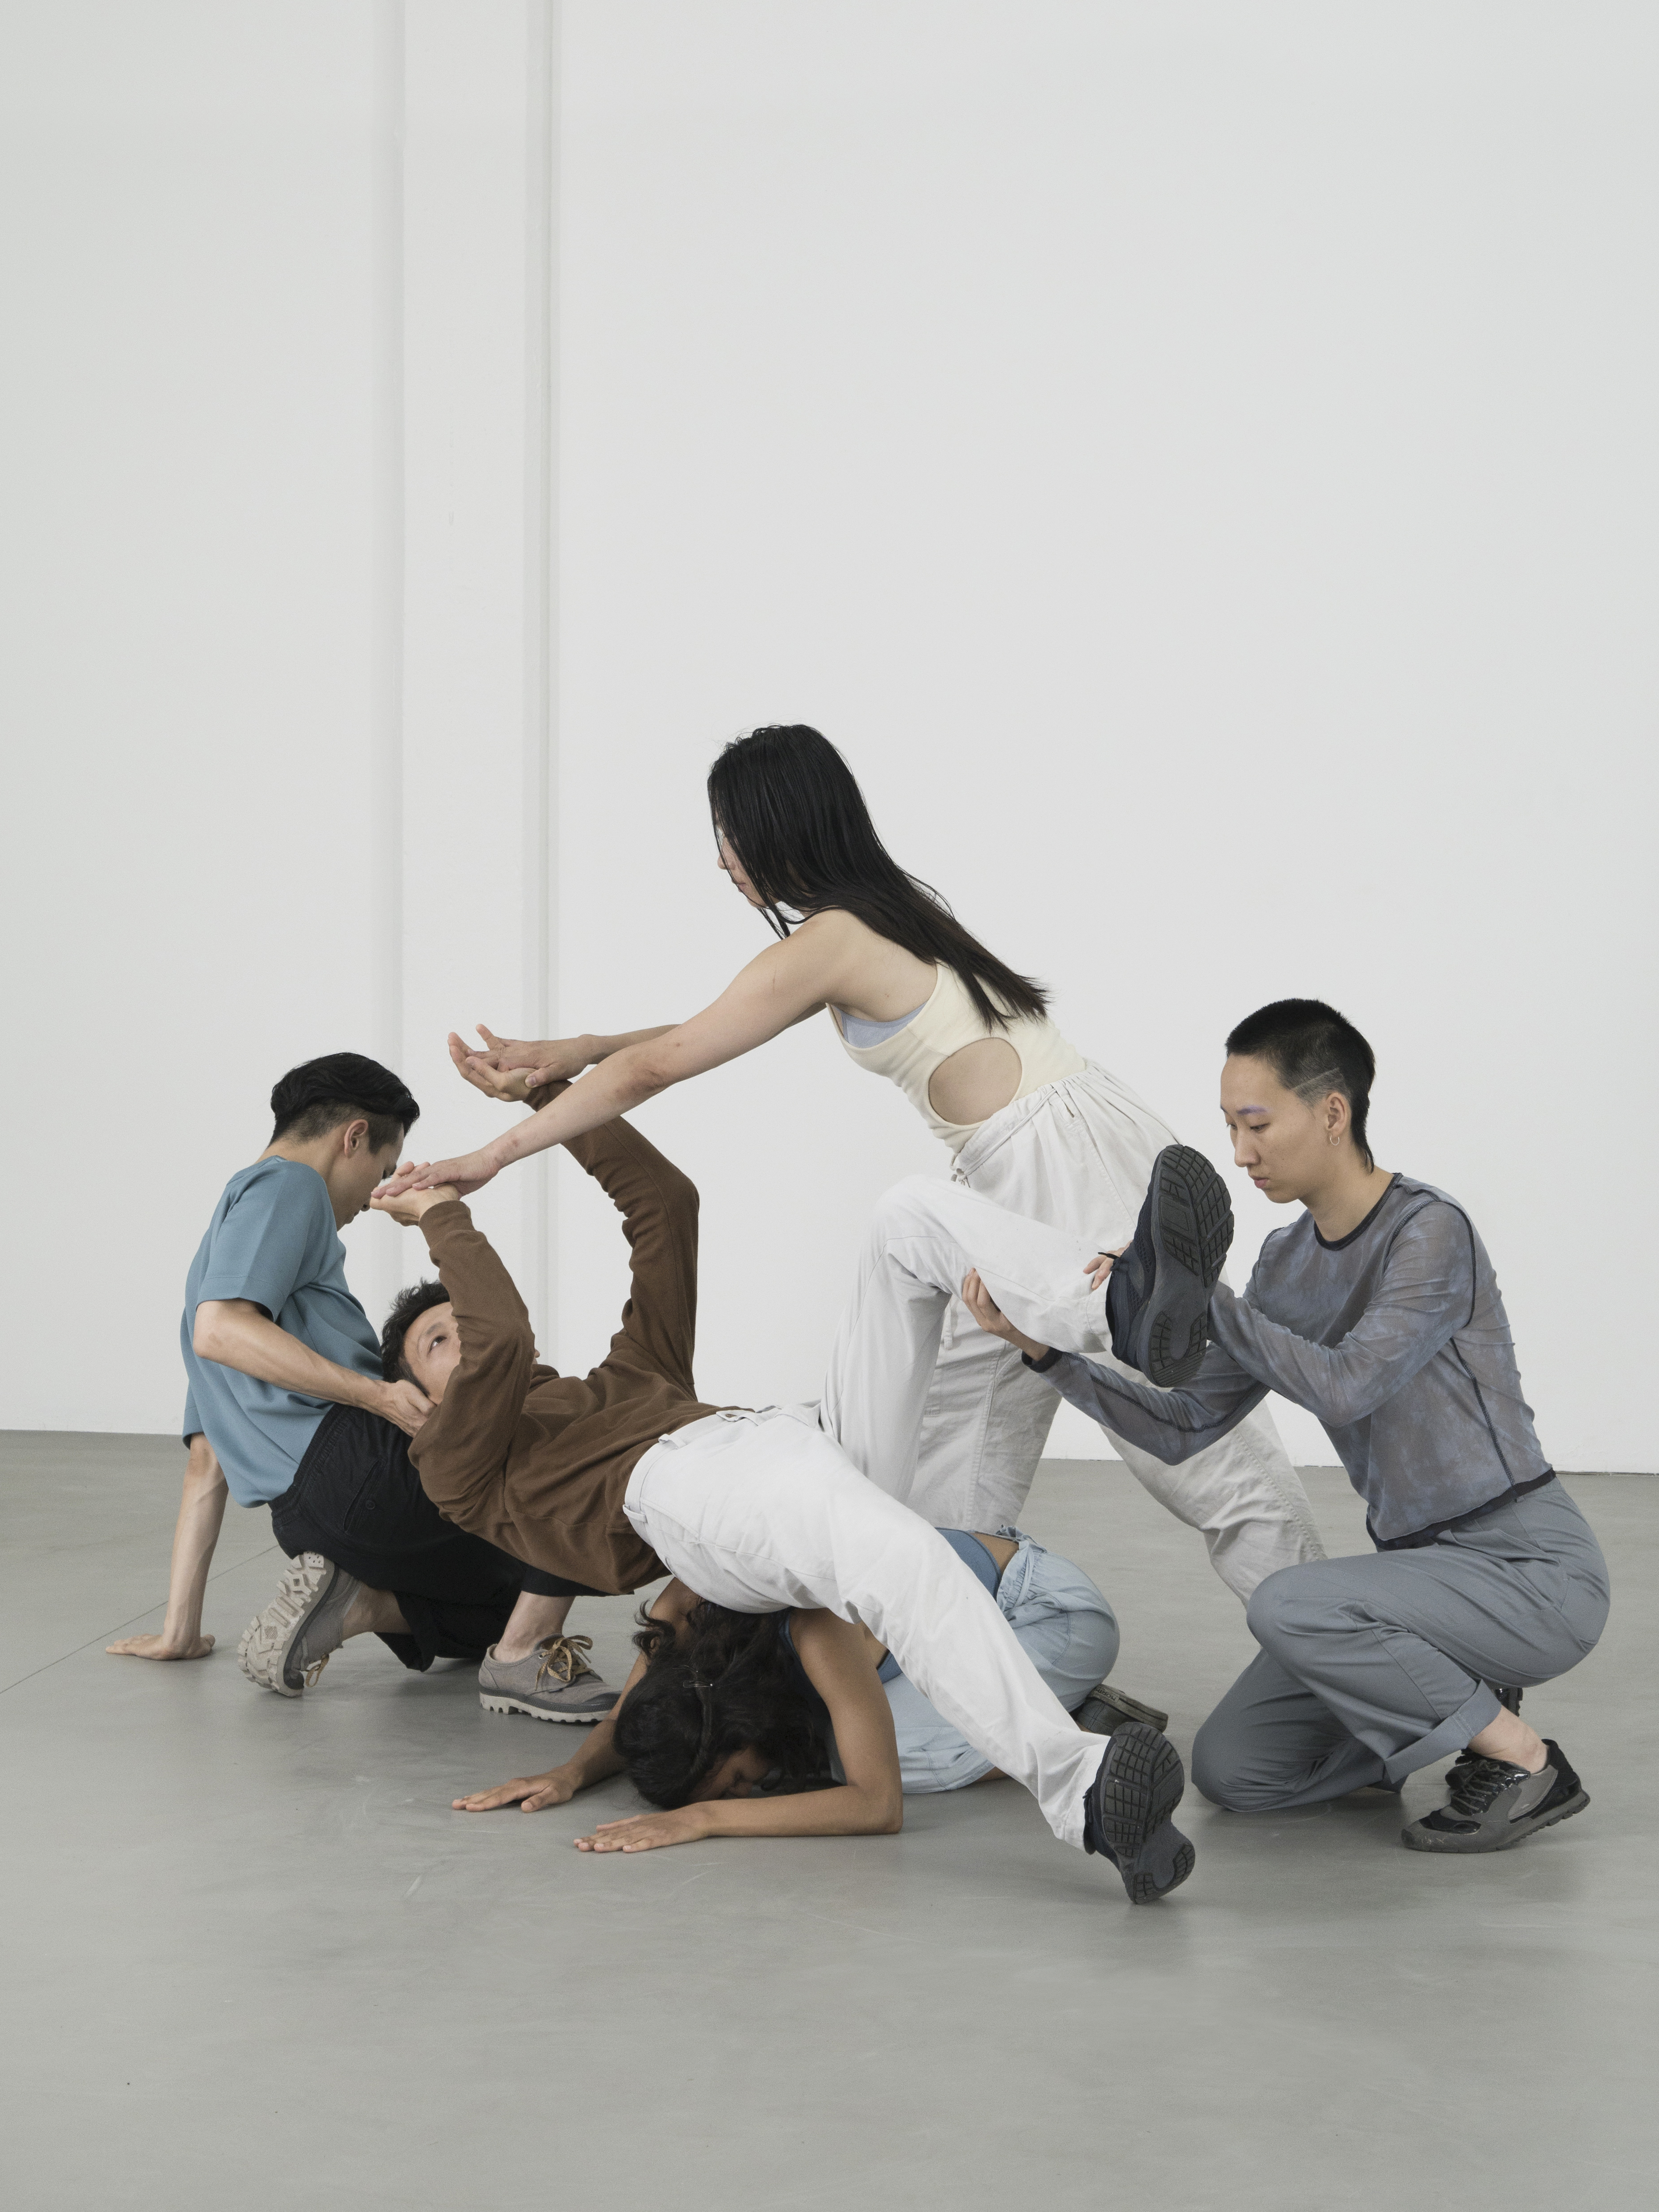 Isaac Chong Wai participates in the “Nationalgalerie – A Collection for the 21st Century”, a group exhibition at the Hamburger Bahnhof – Nationalgalerie der Gegenwart